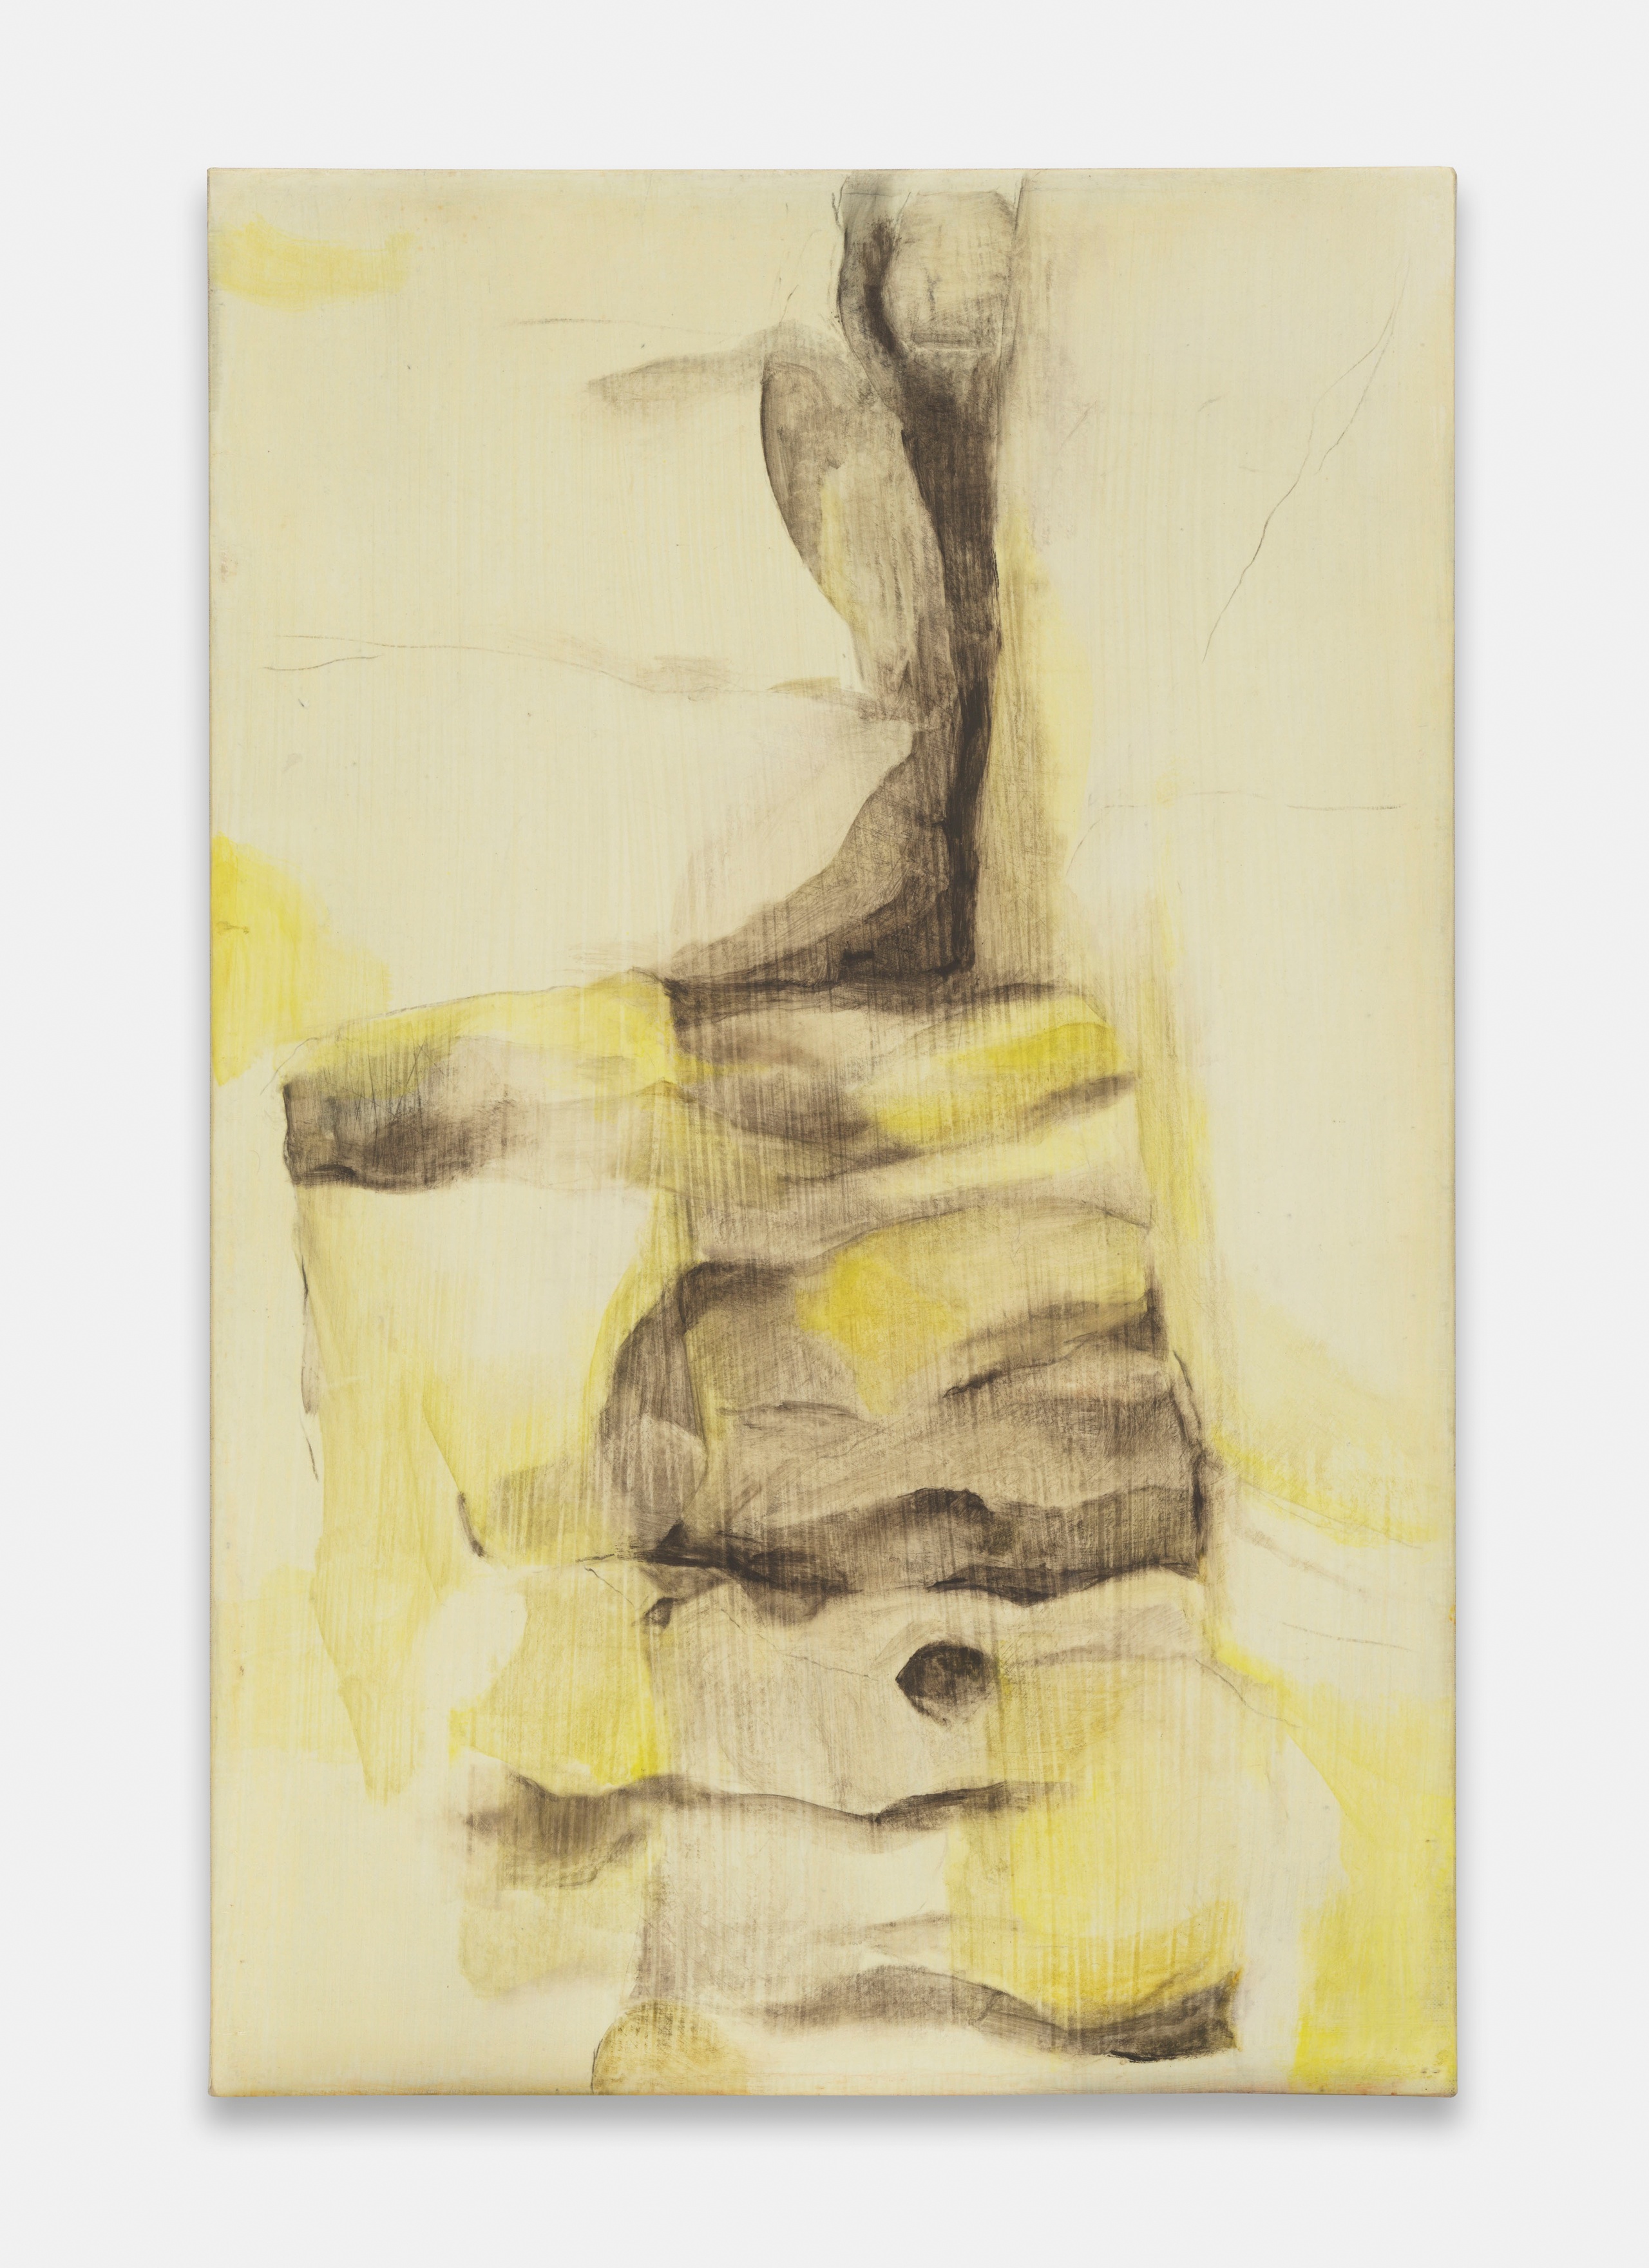 Beaux MendesUntitled, 2023charcoal and oil on half-chalk ground44 x 27.5 cm | 17 1/3 x 10 3/4 in